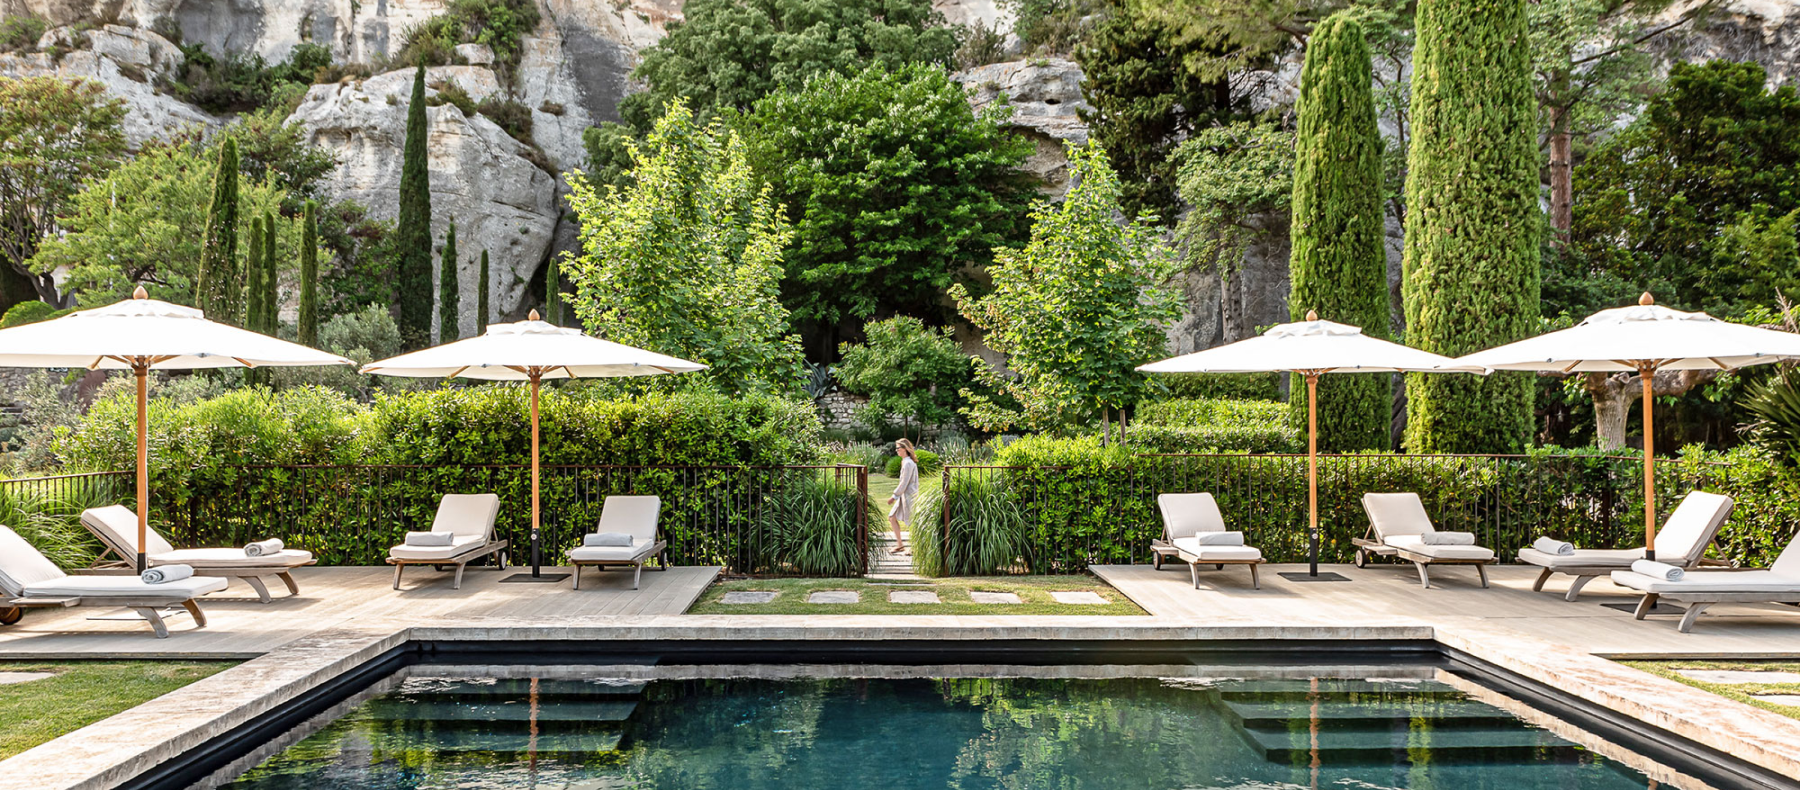 A serene oasis awaits, with a crystal-clear pool embraced by elegant lawn chairs and umbrellas.